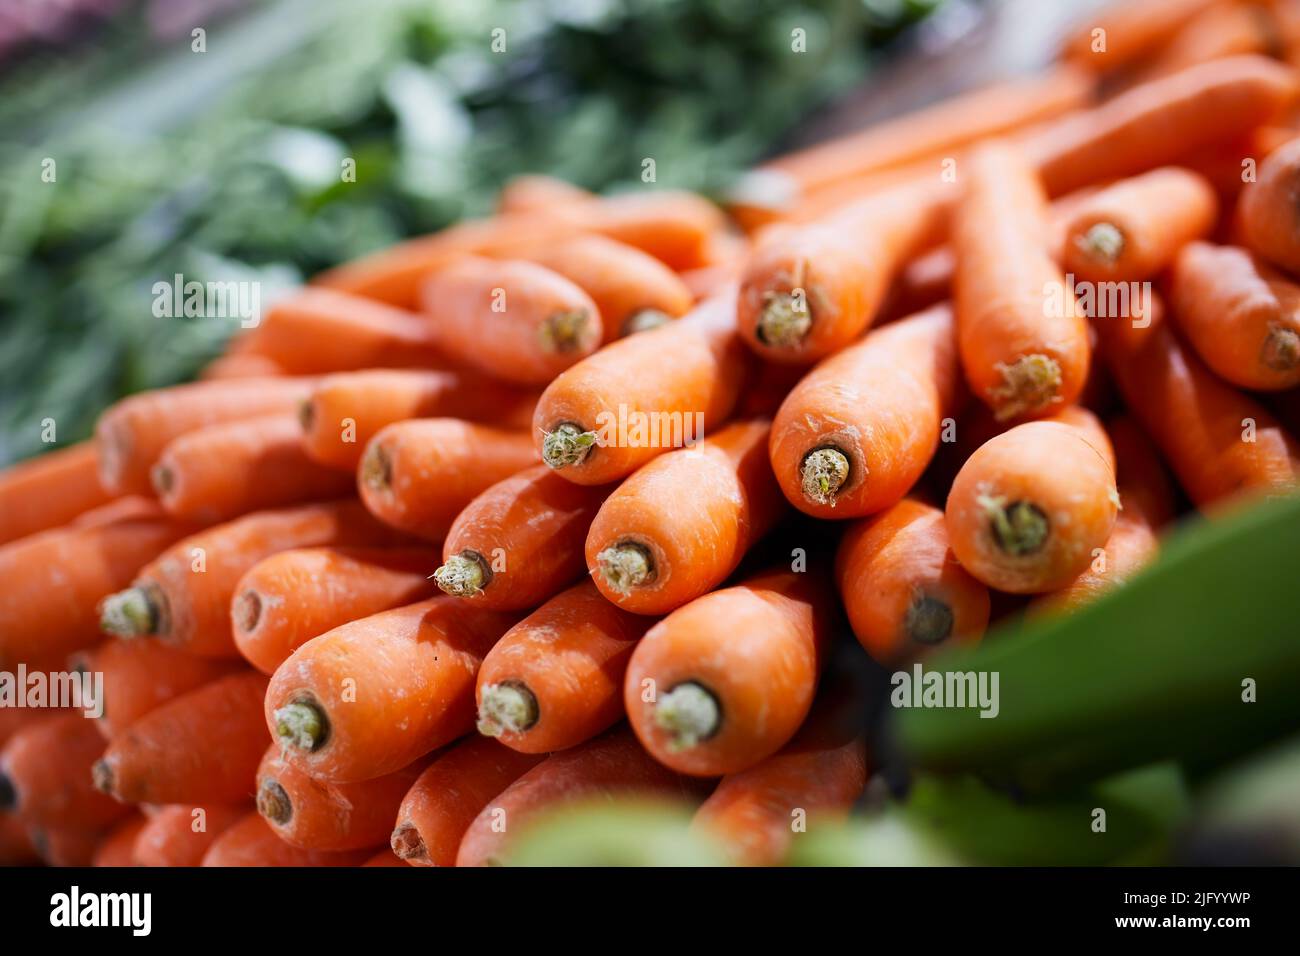 Selective focus on carrot. Sale of fresh raw vegetable in market stall. Stock Photo